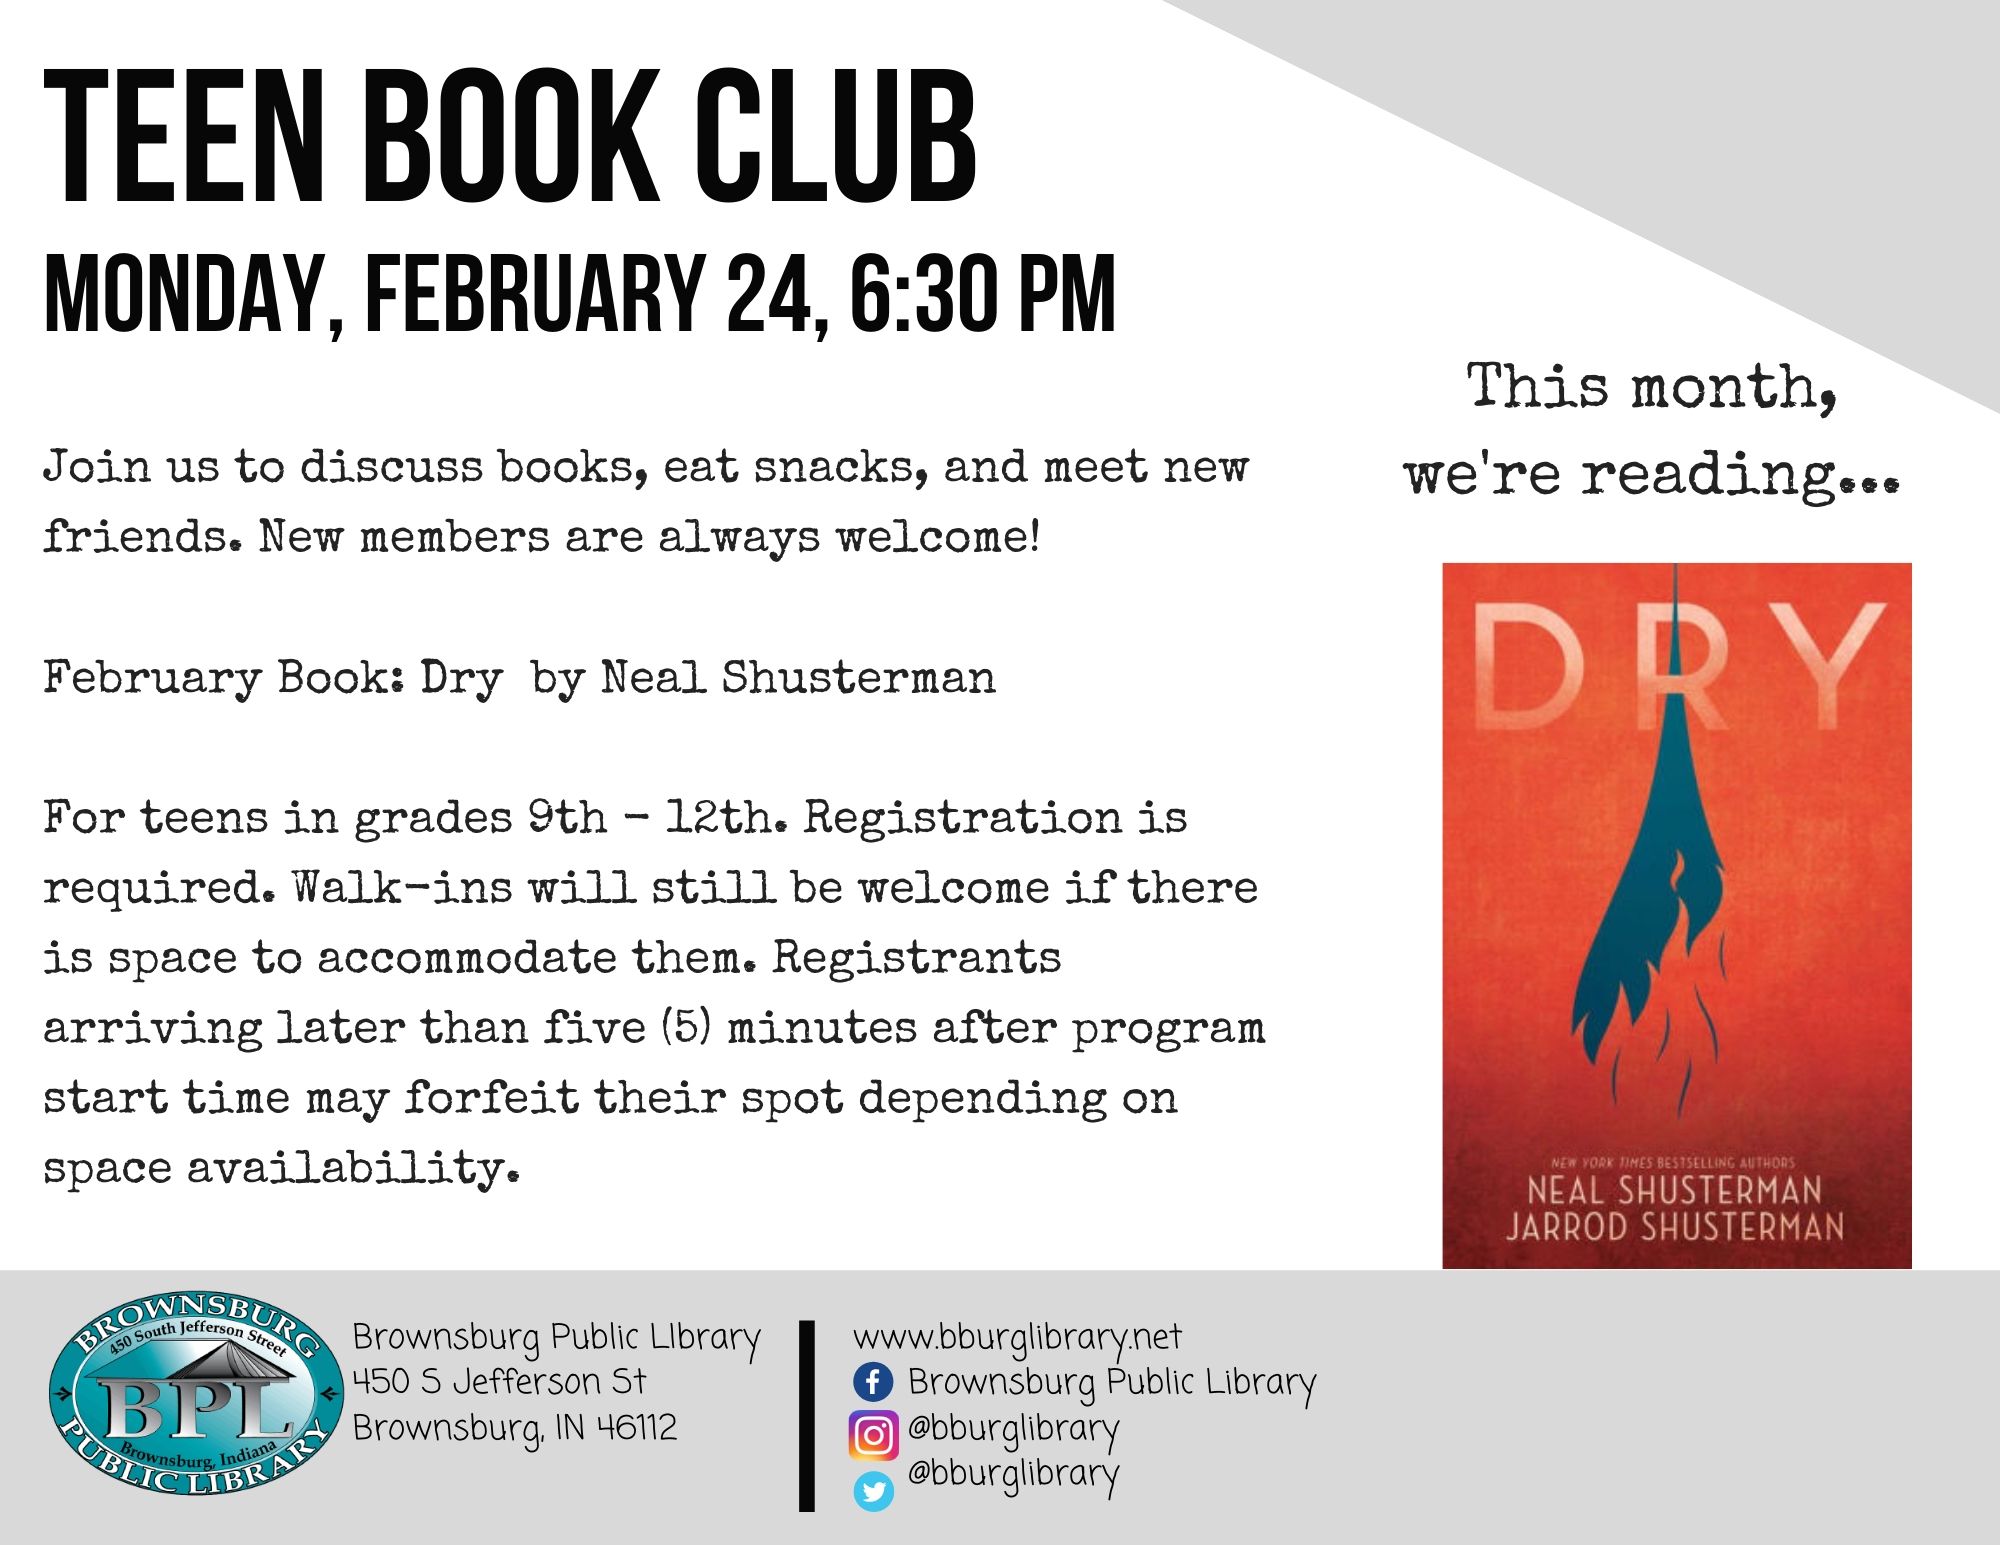 Teen Book Club Dry by Neal Shusterman February 24th at 6:30